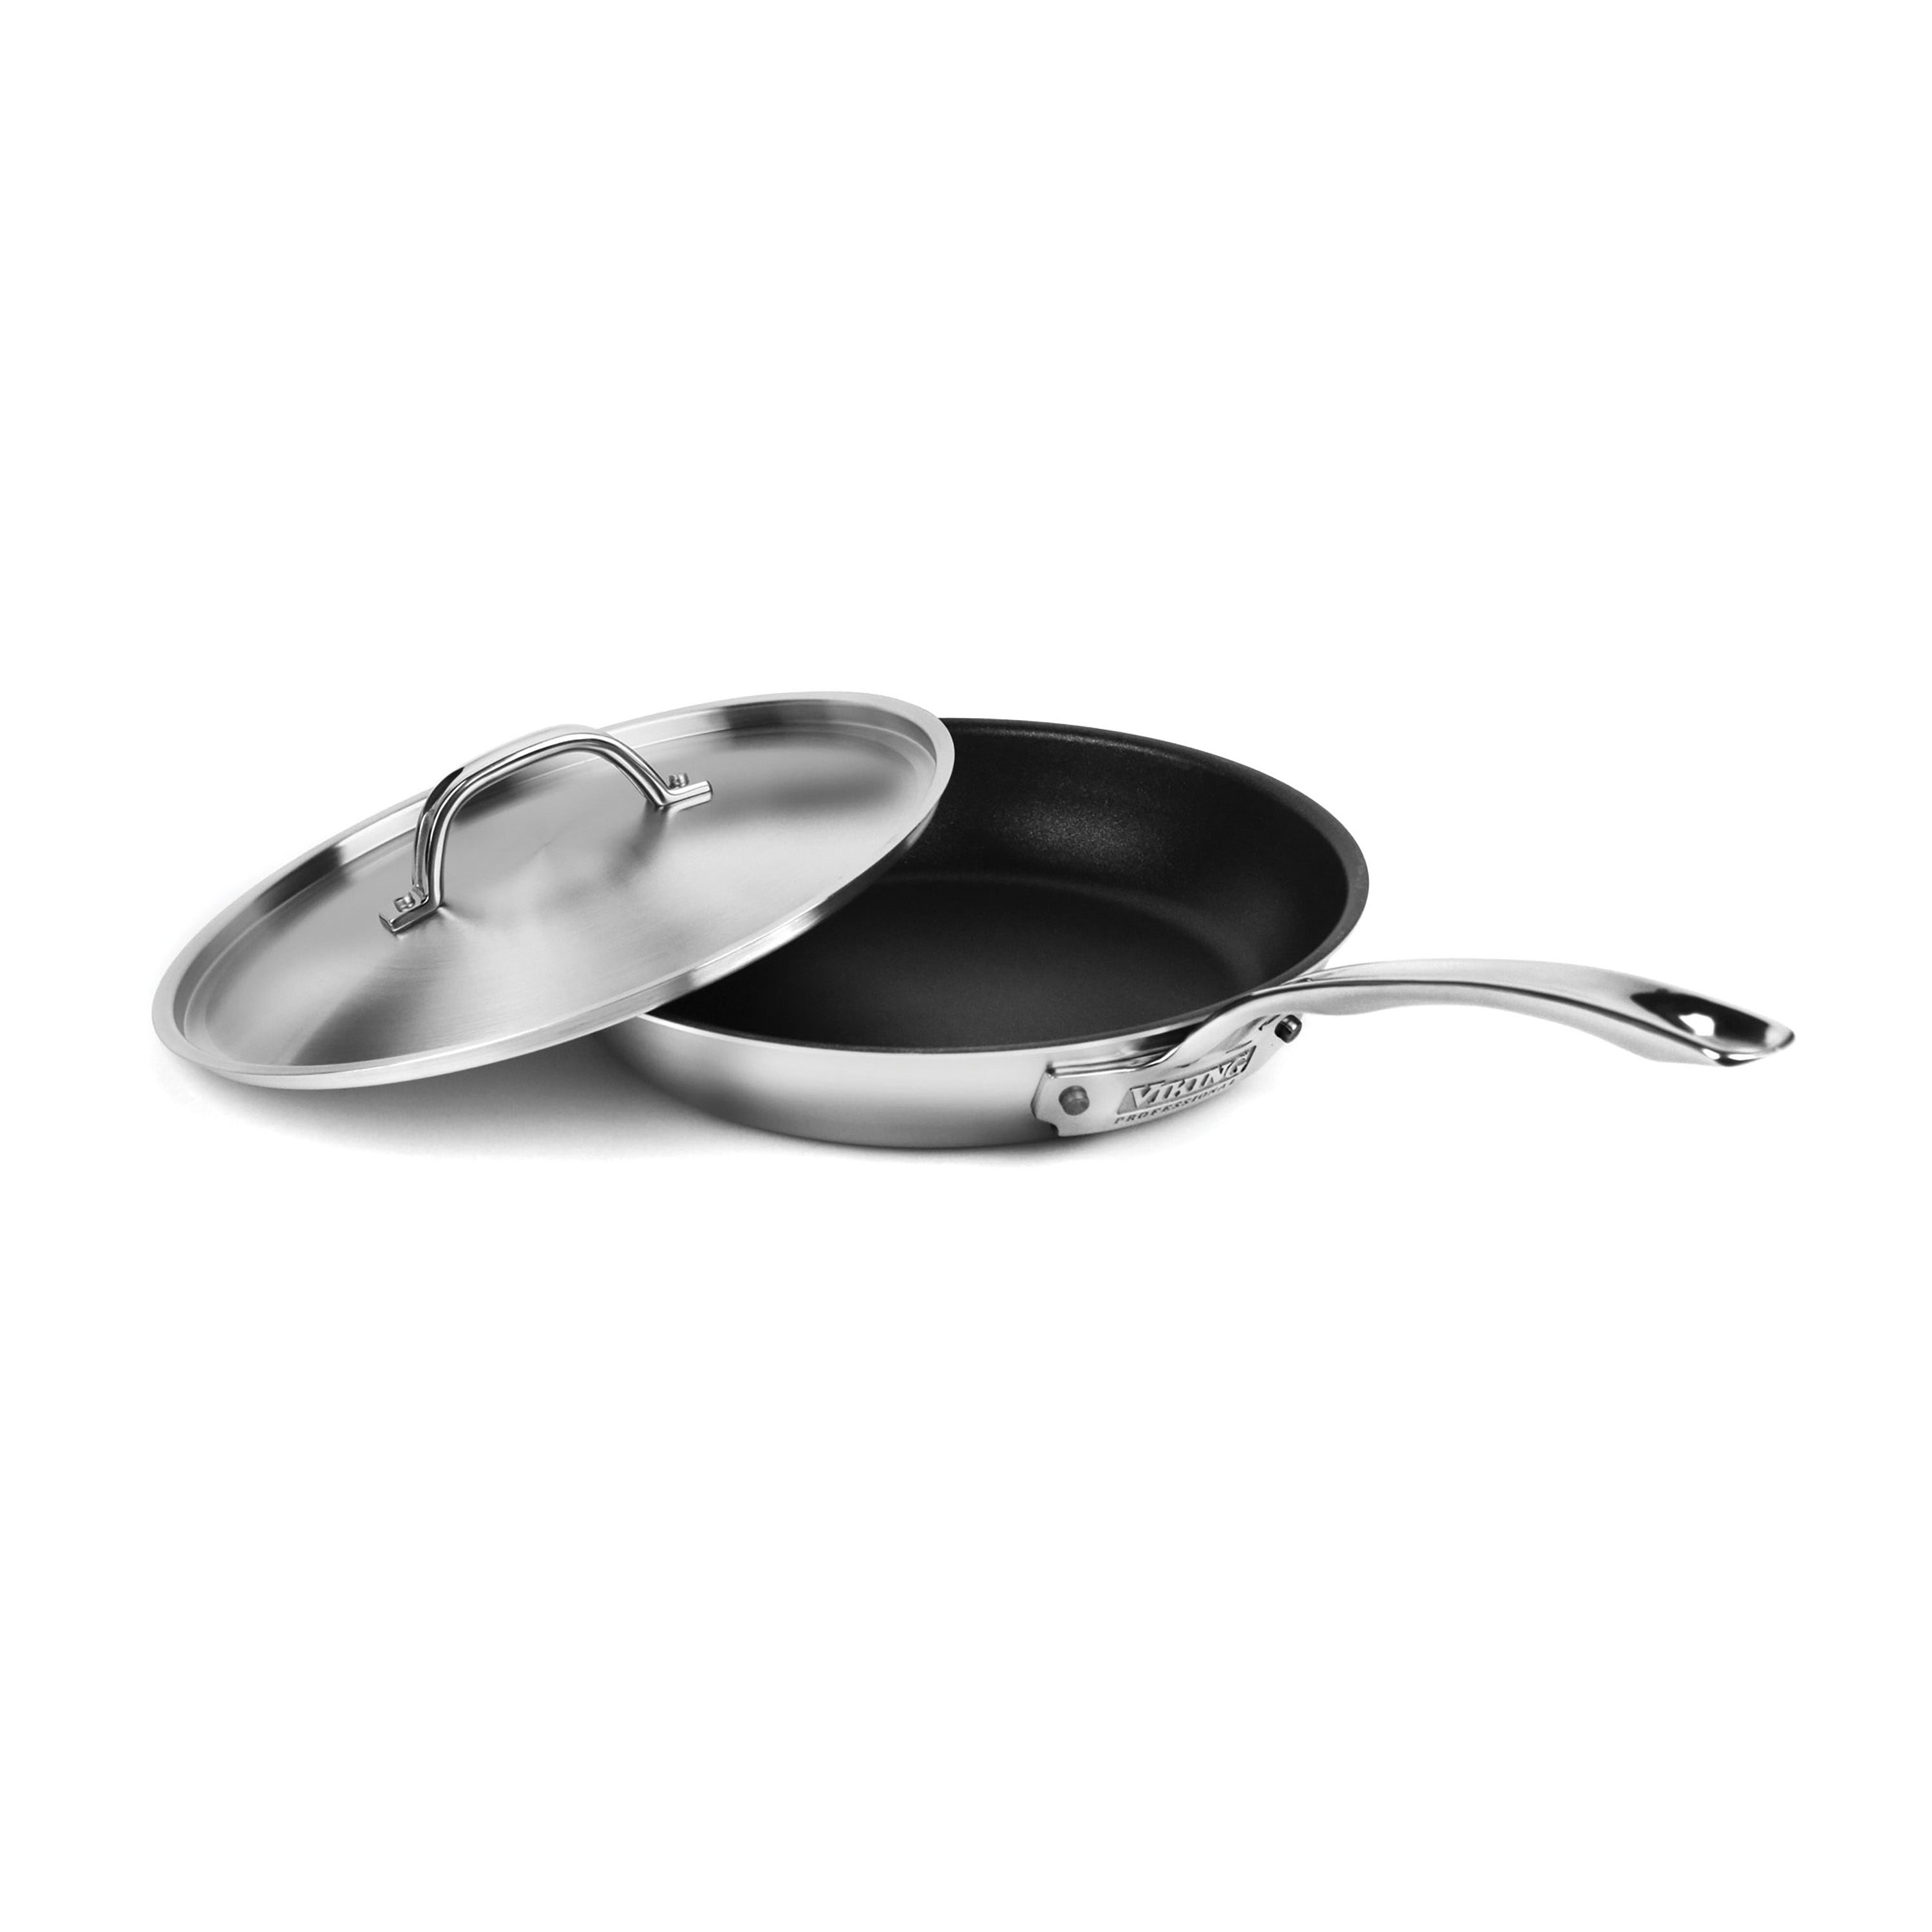 Viking Professional 5-Ply Stainless Steel Nonstick 10-Inch Fry Pan